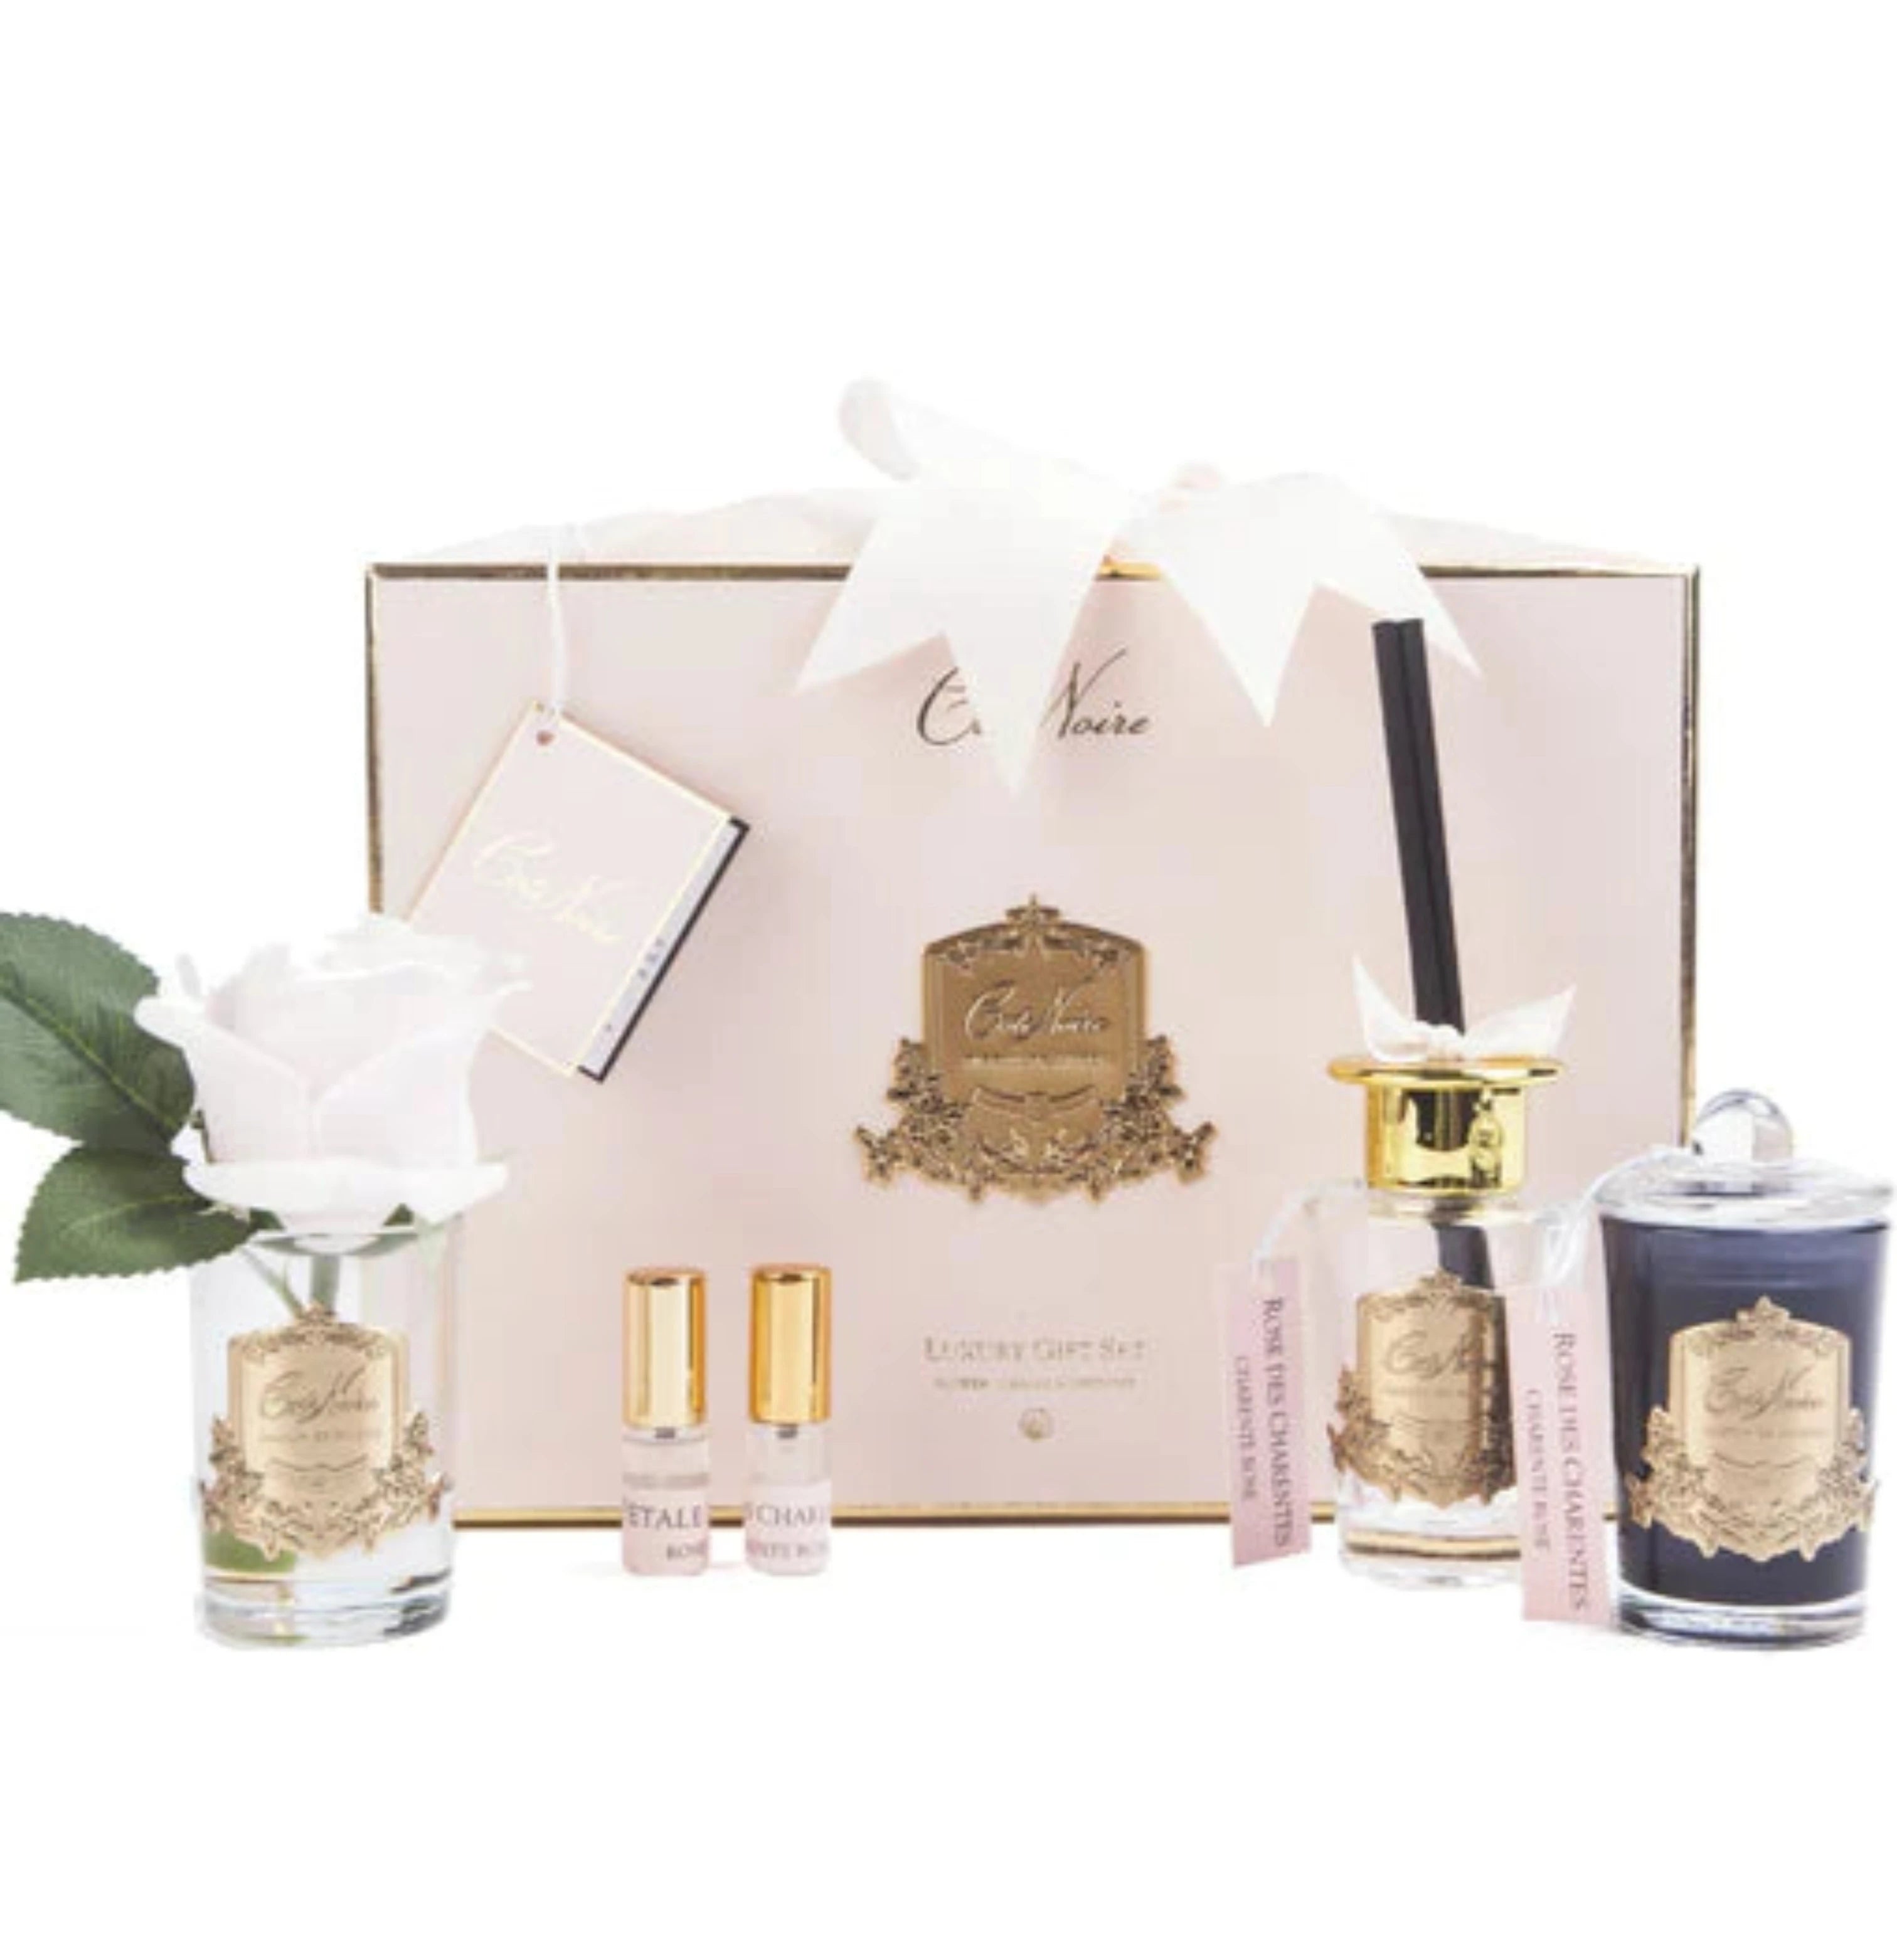 Côte Noire Charente Rose Gold Gift Collection